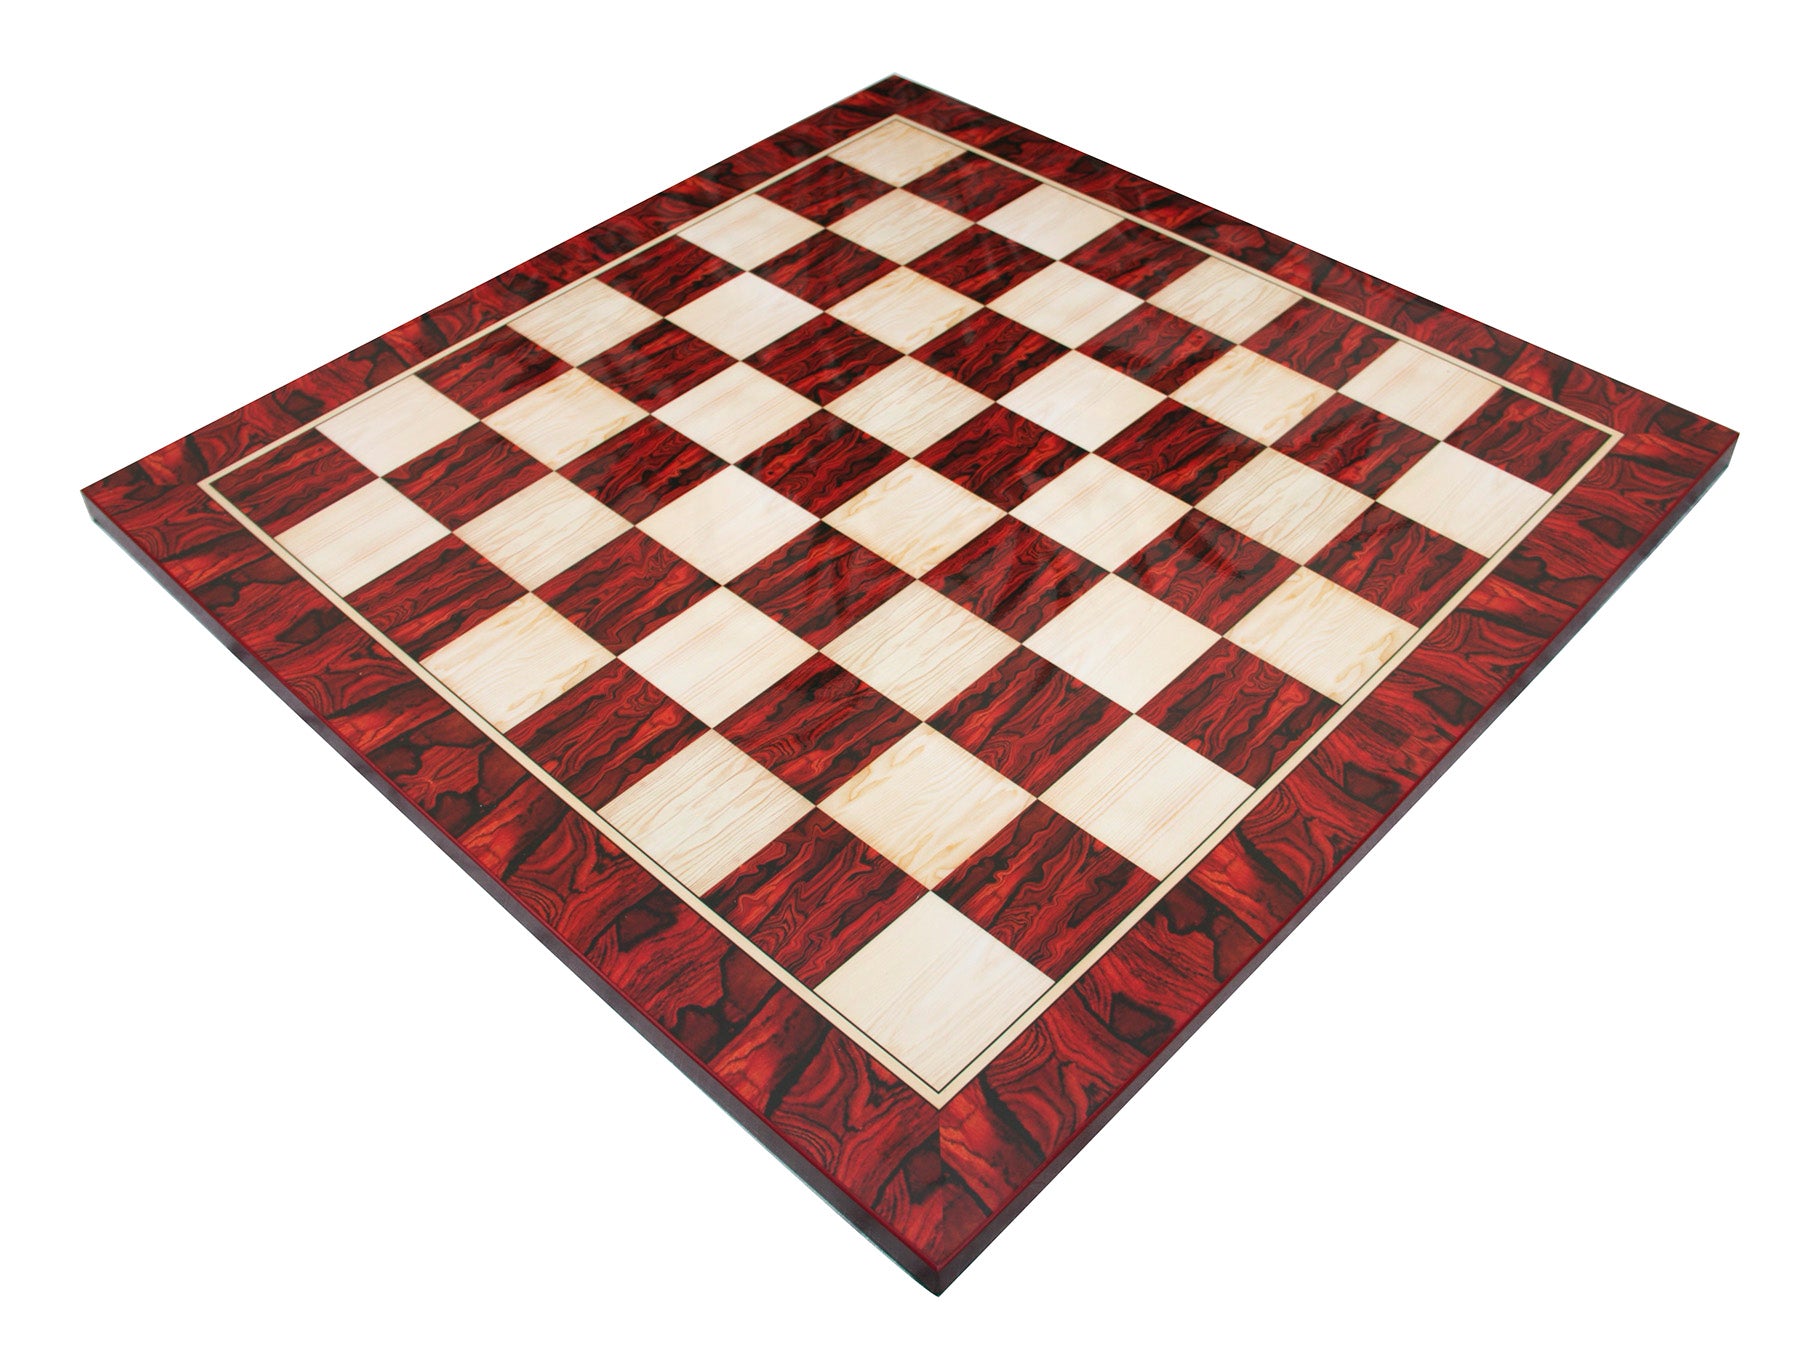 Luxury Chess Board 2.5" Square made in Burl Rosewood and Burl Maple Wood Look